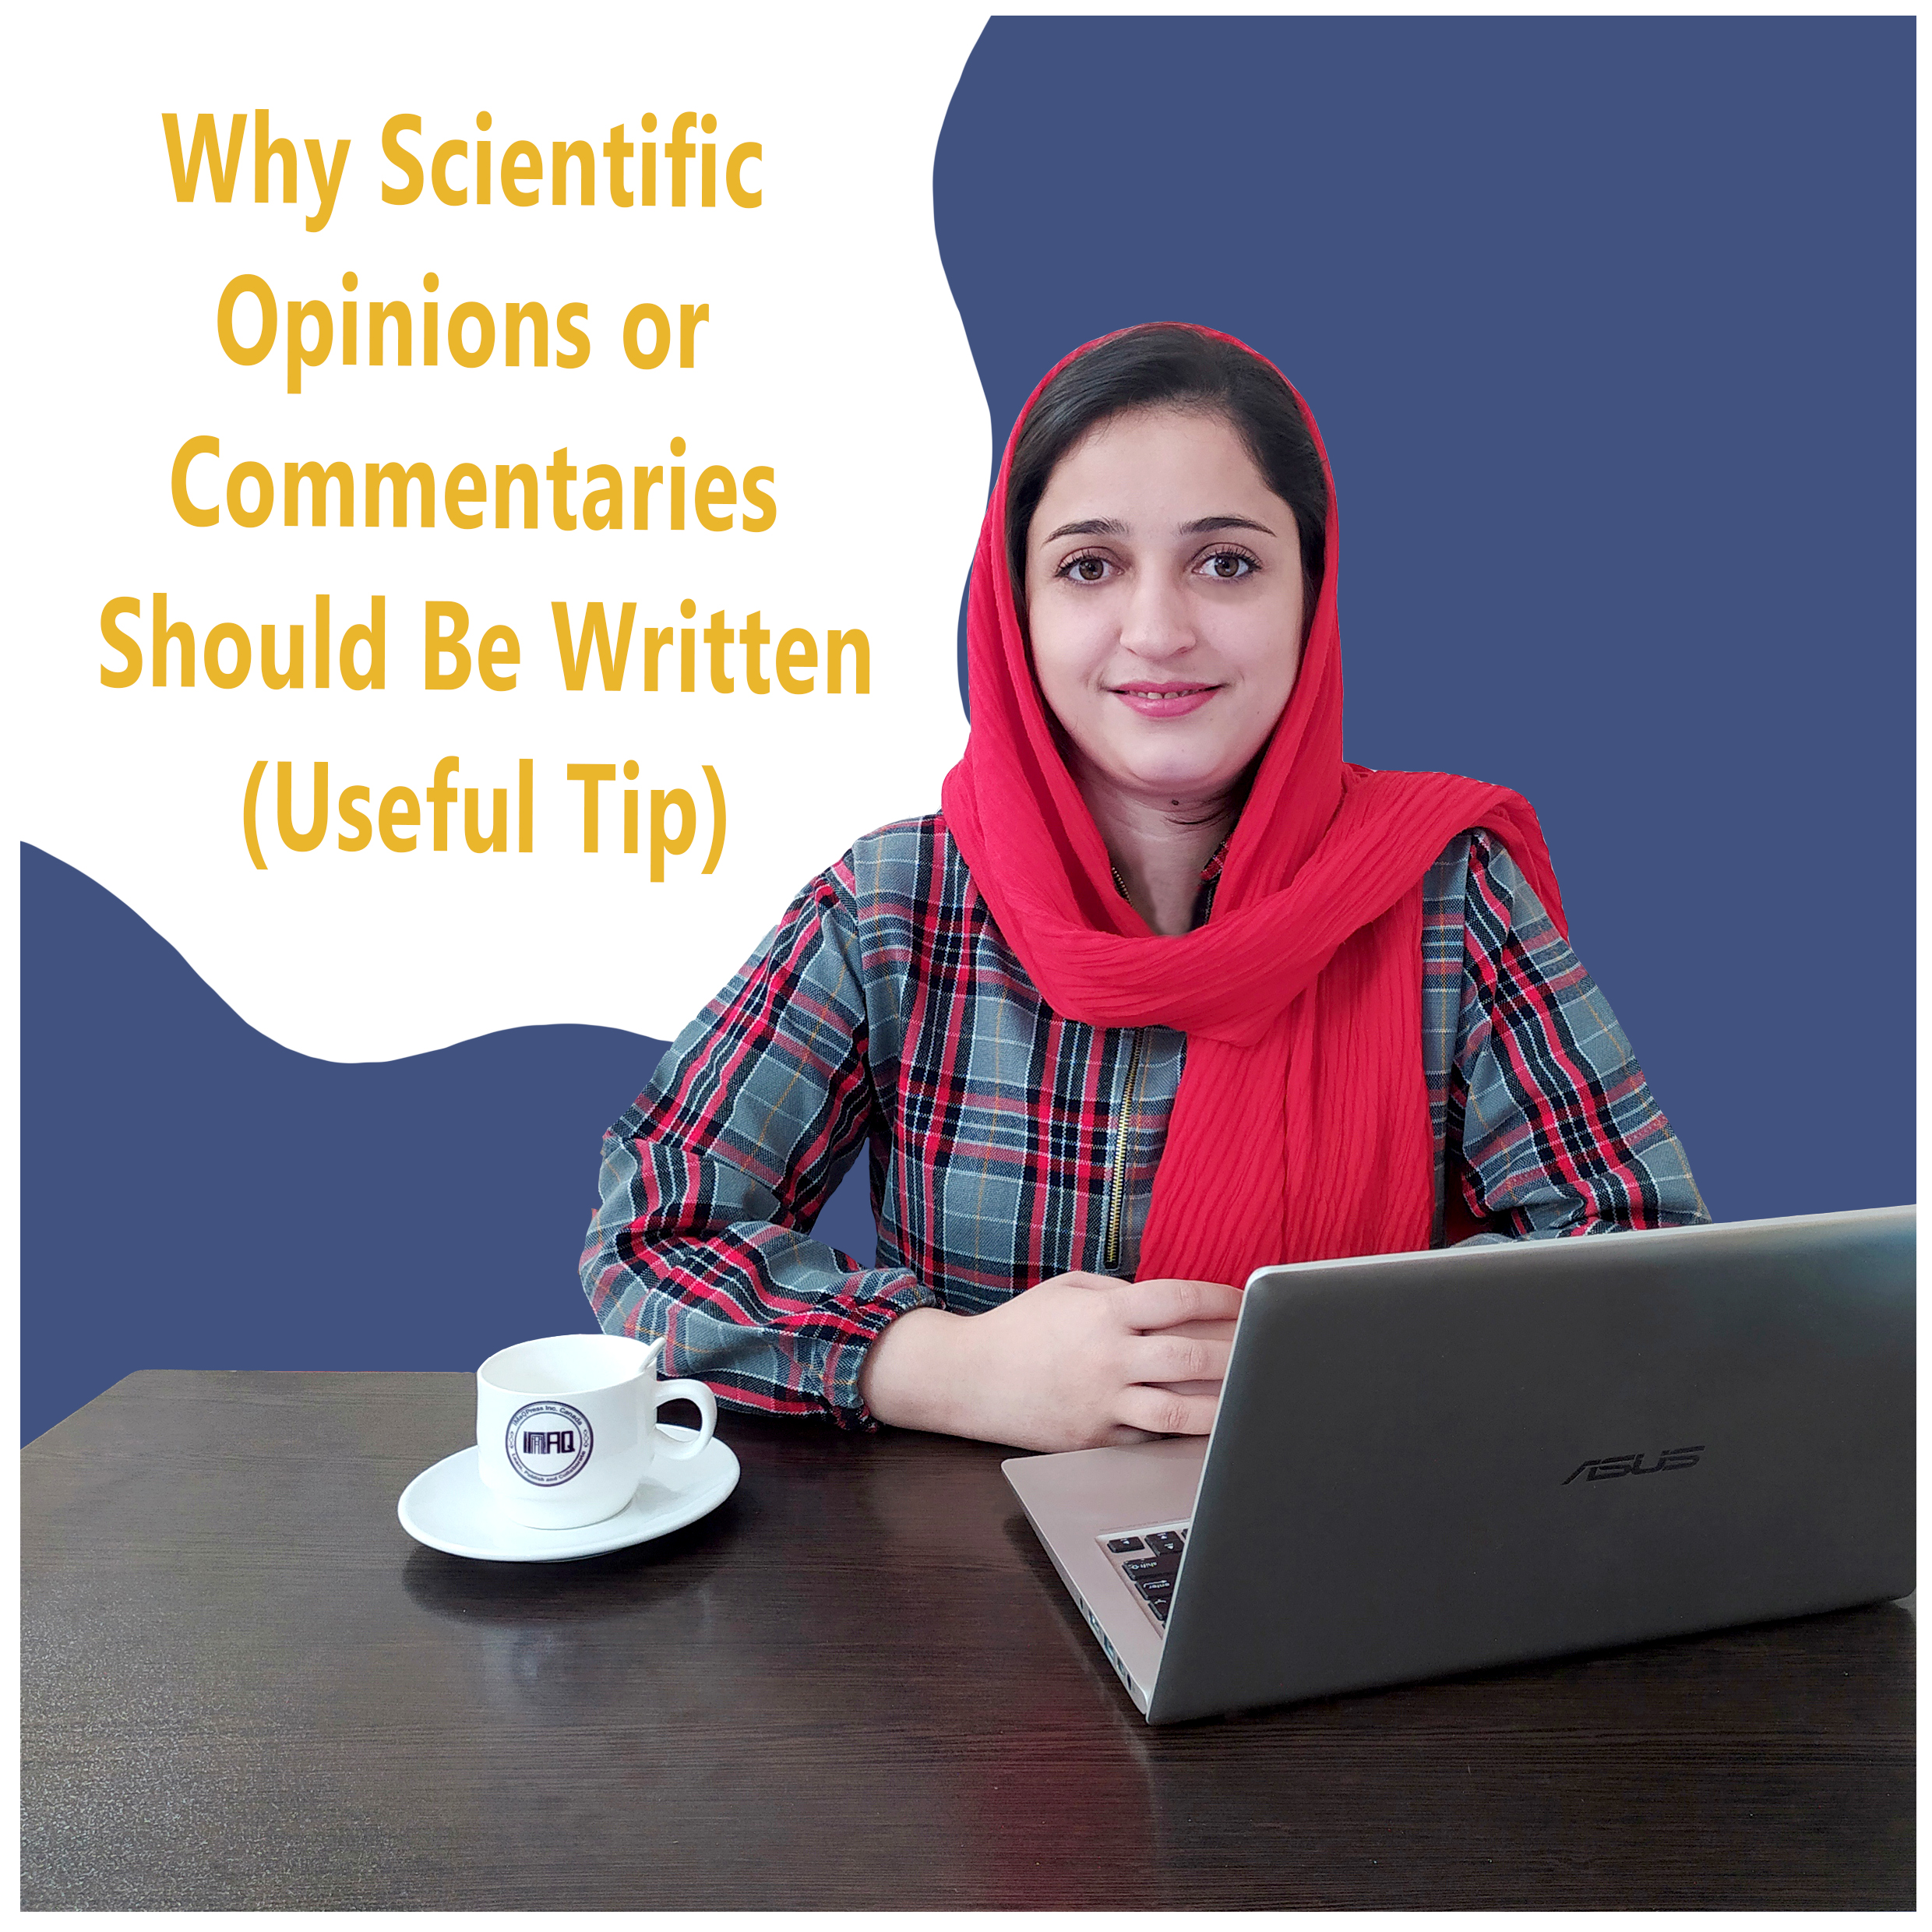 Useful Tips on Writing the Scientific Opinions and Scientific Commentaries by Dr. Monireh Bahrami